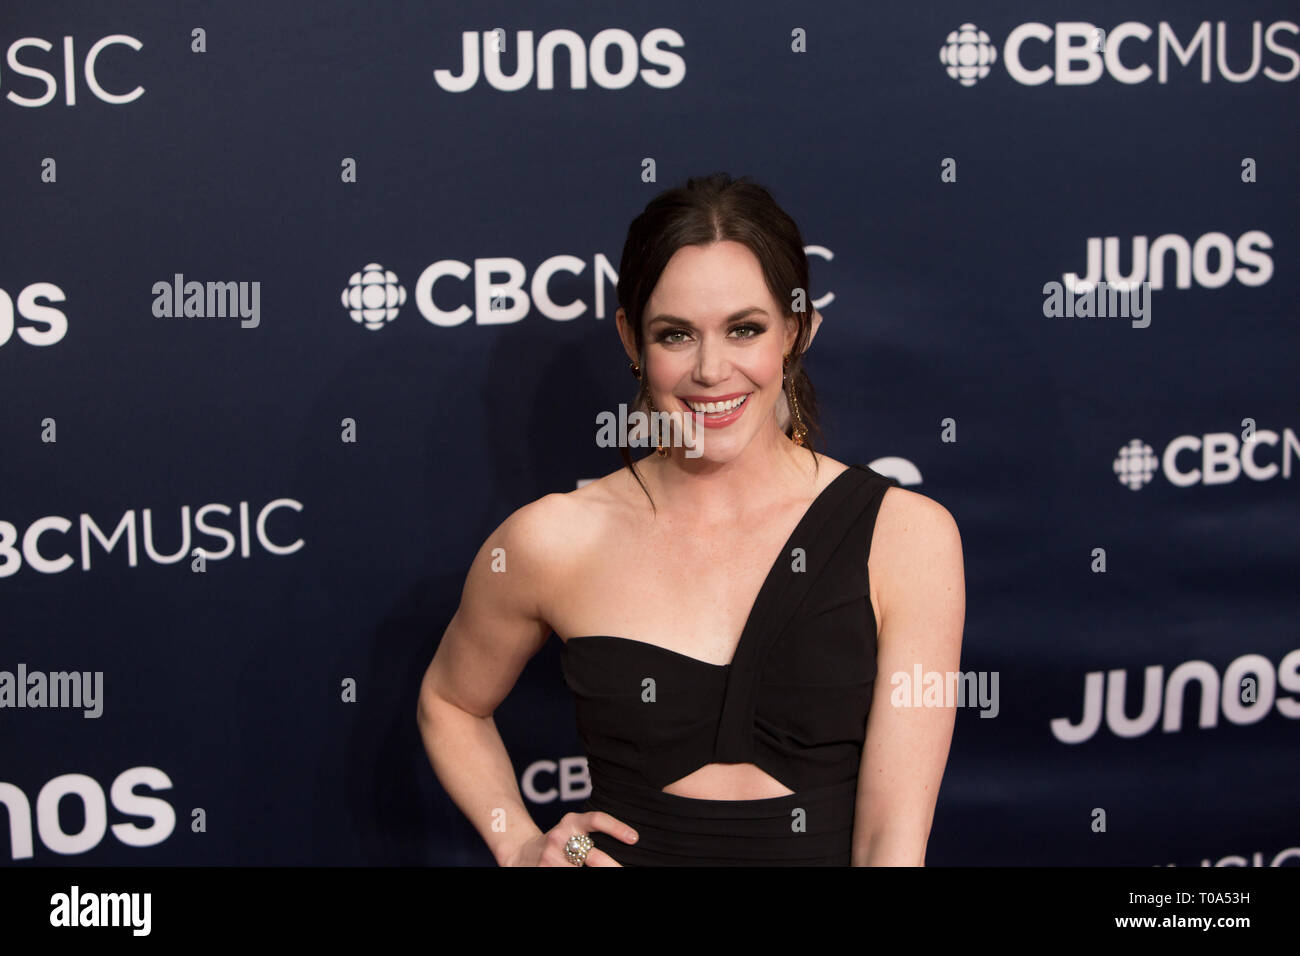 Budweiser Gardens, London, Ontario, CANADA. 17th Mar 2019. Olympic champion  ice dancer Tessa Virtue on the 2019 JUNO Awards red carpet at Budweiser  Gardens, in London, Ontario, CANADA Credit: topconcertphoto/Alamy Live News